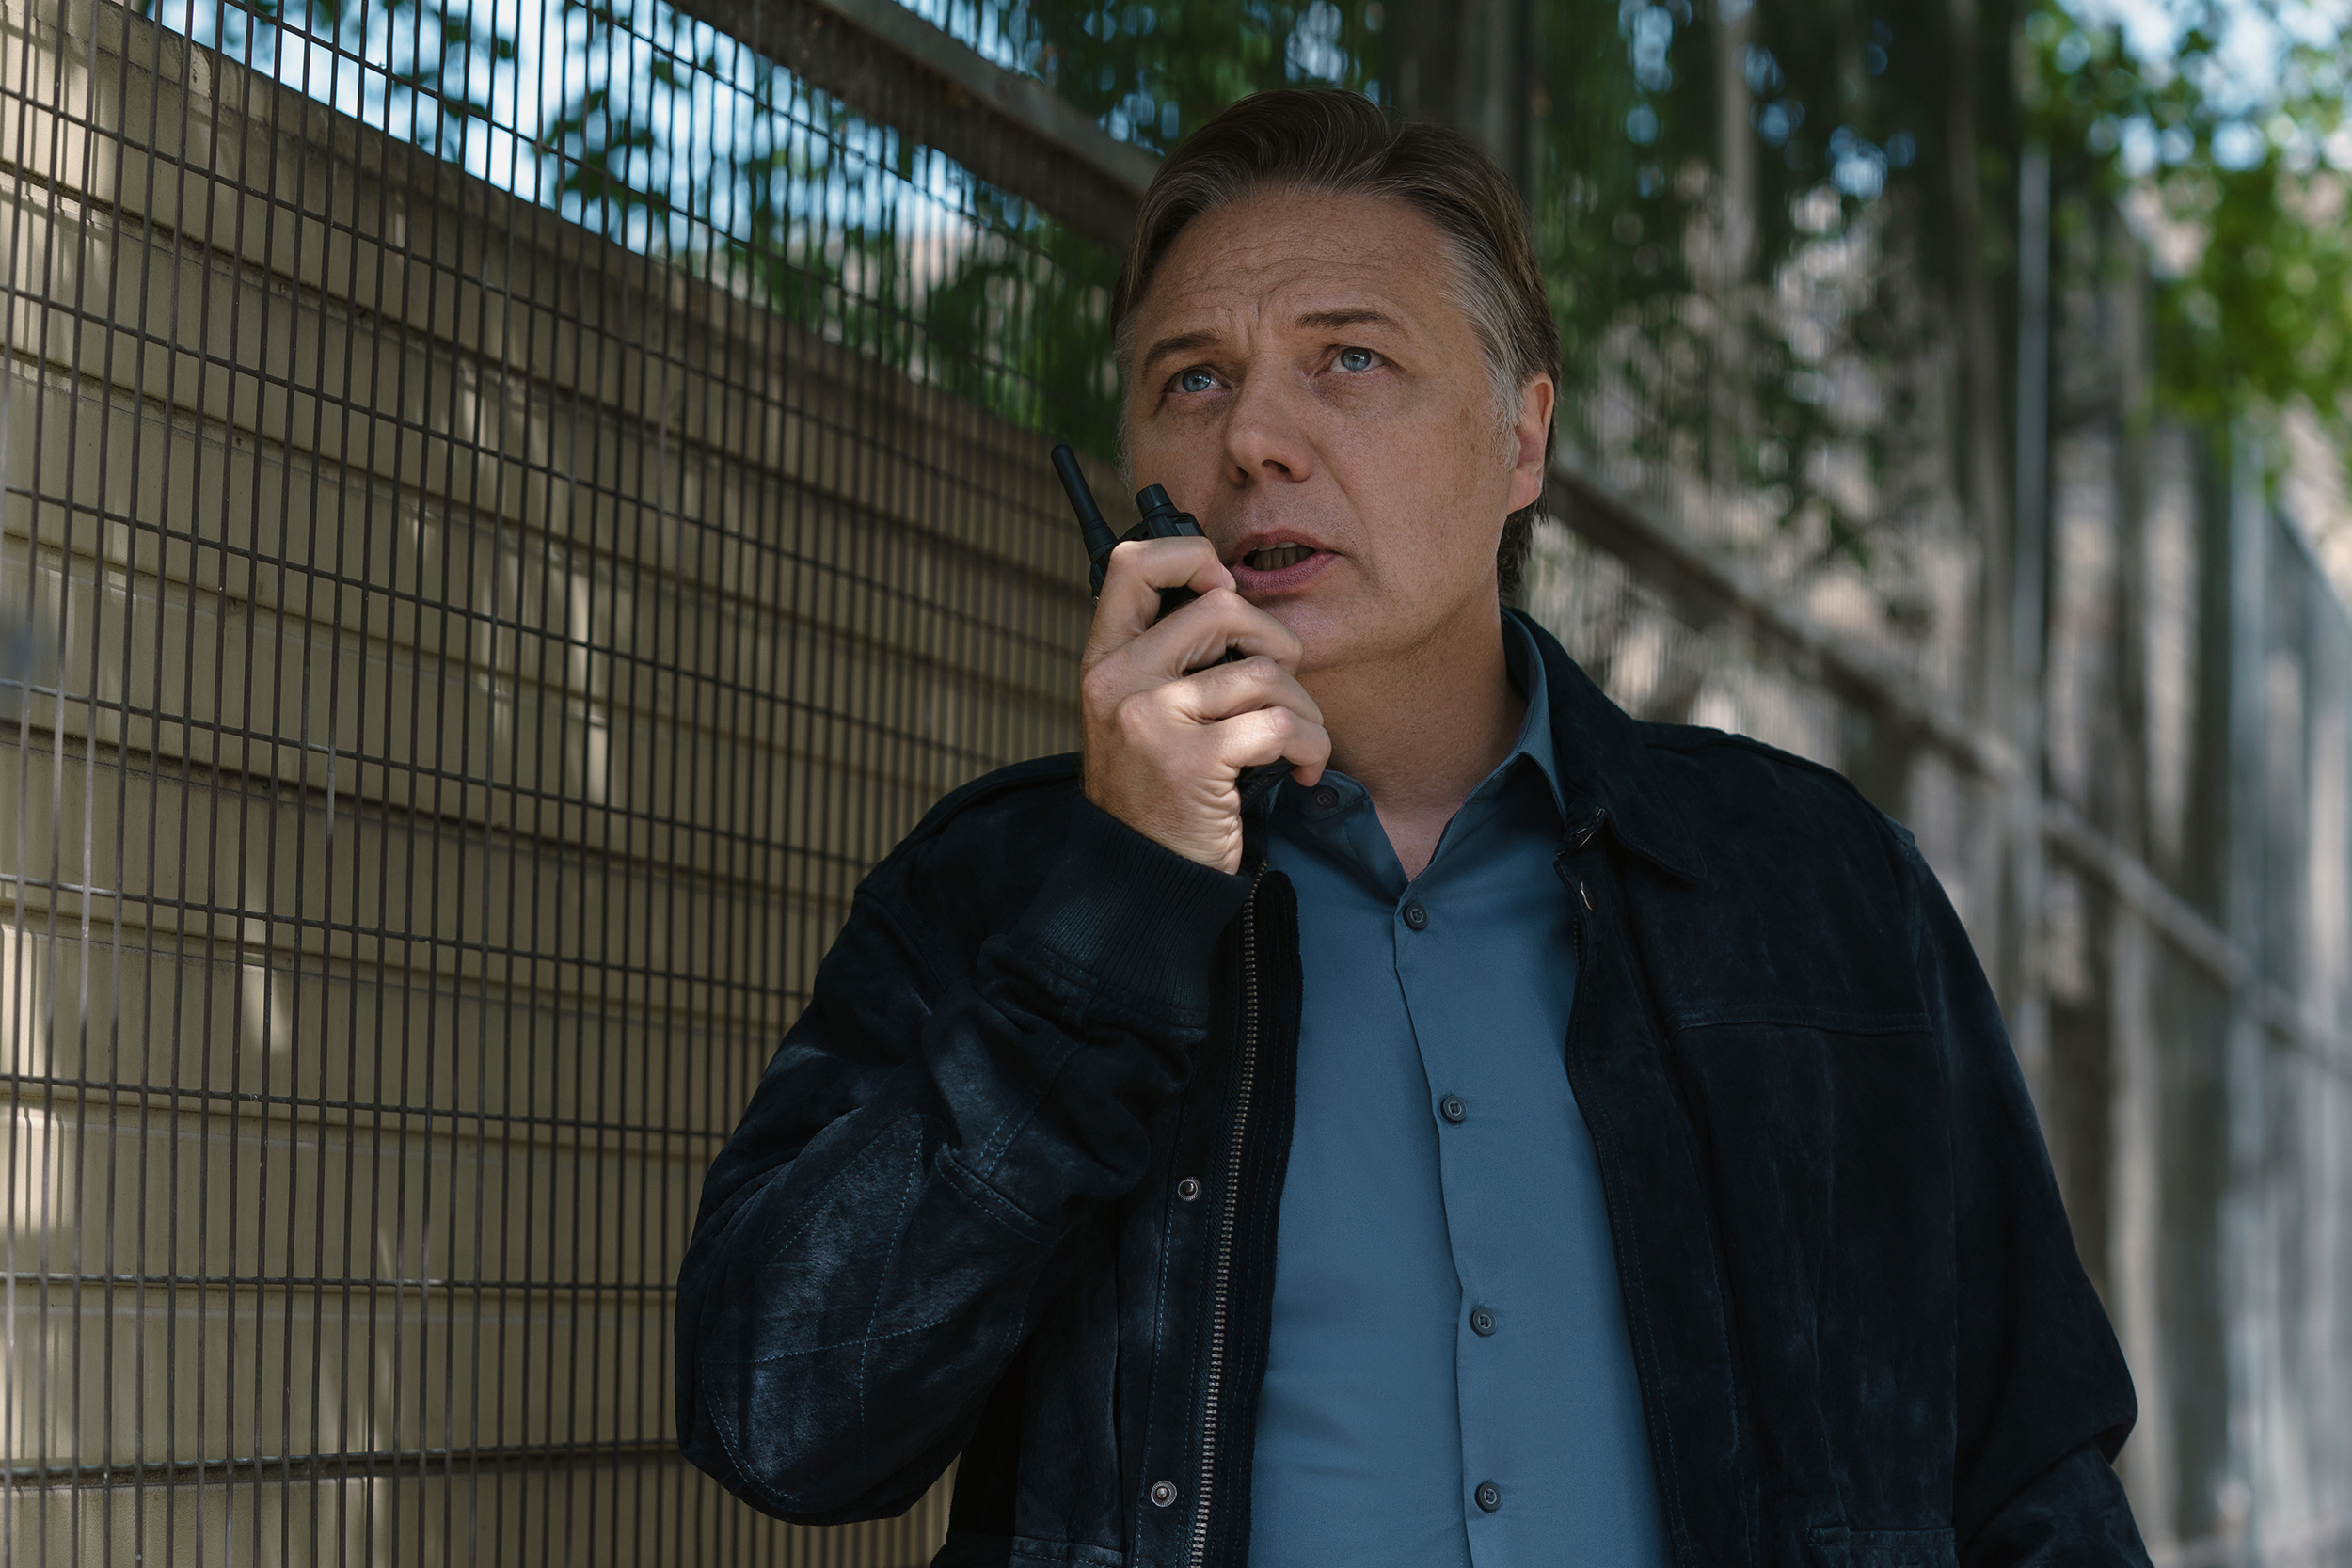 Shaun Dooley as DS Kim Cardwell spies on June in Criminal Record Season 1